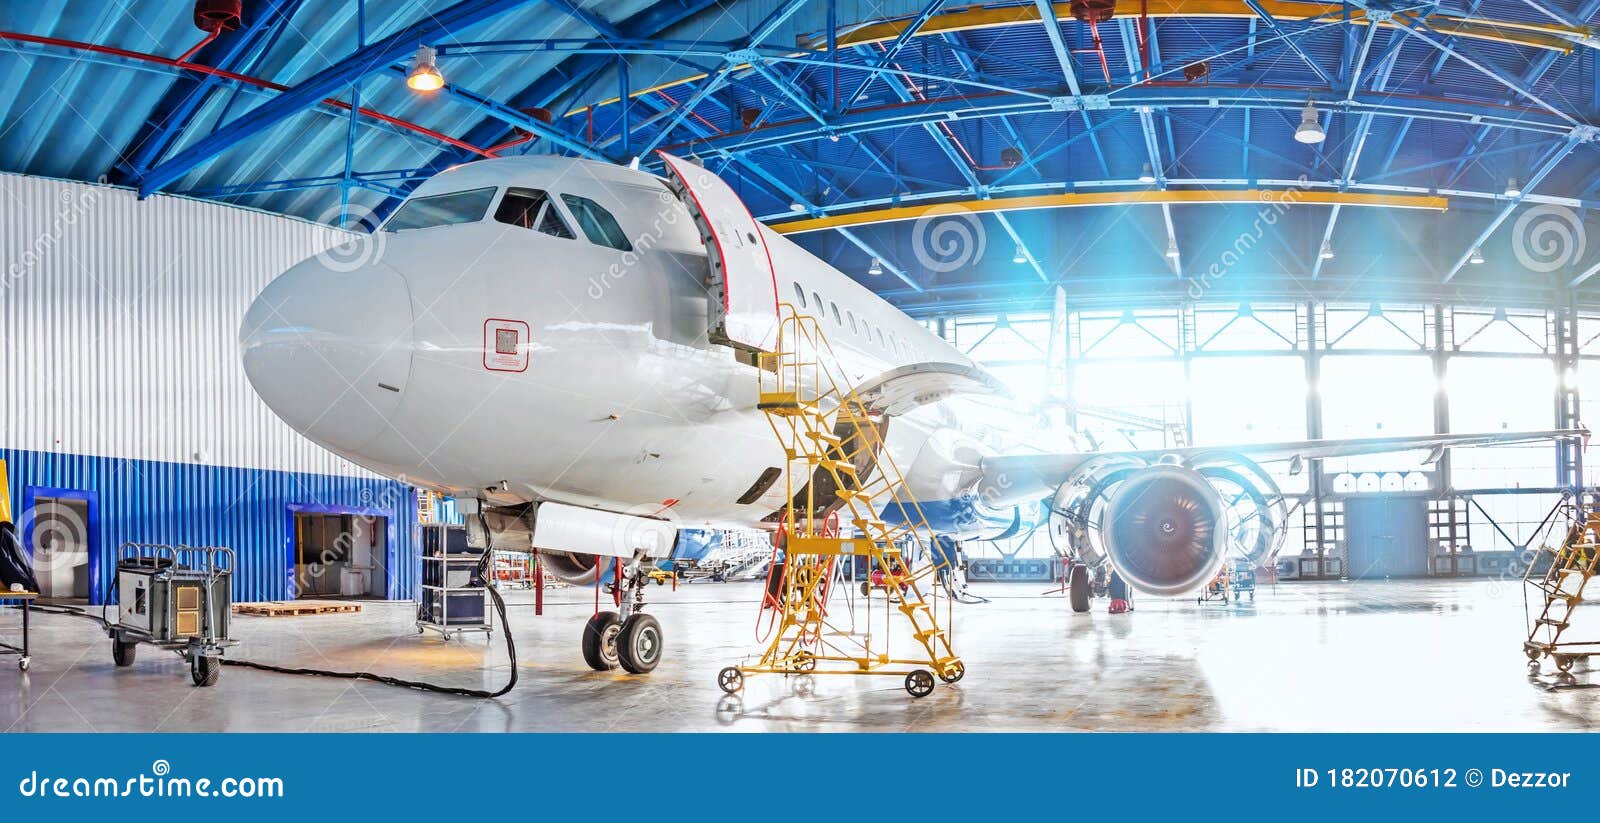 panoramic view of aerospace hangar, civil aviation aircraft, repair and maintenance of mechanical parts in an industrial workshop